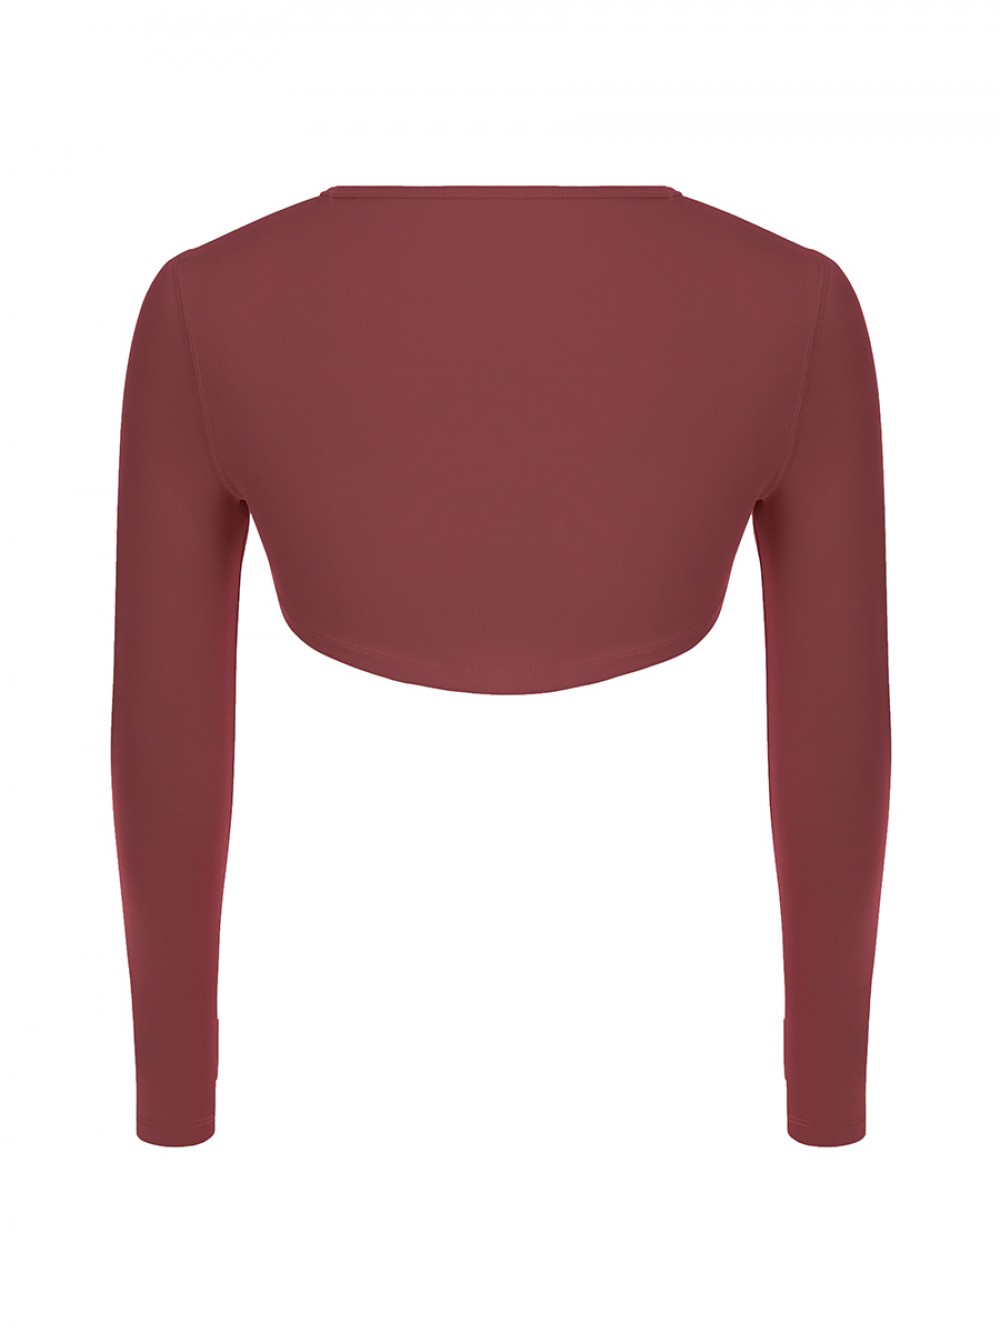 Jujube Red Long Sleeve Running Top Crew Neck For Training